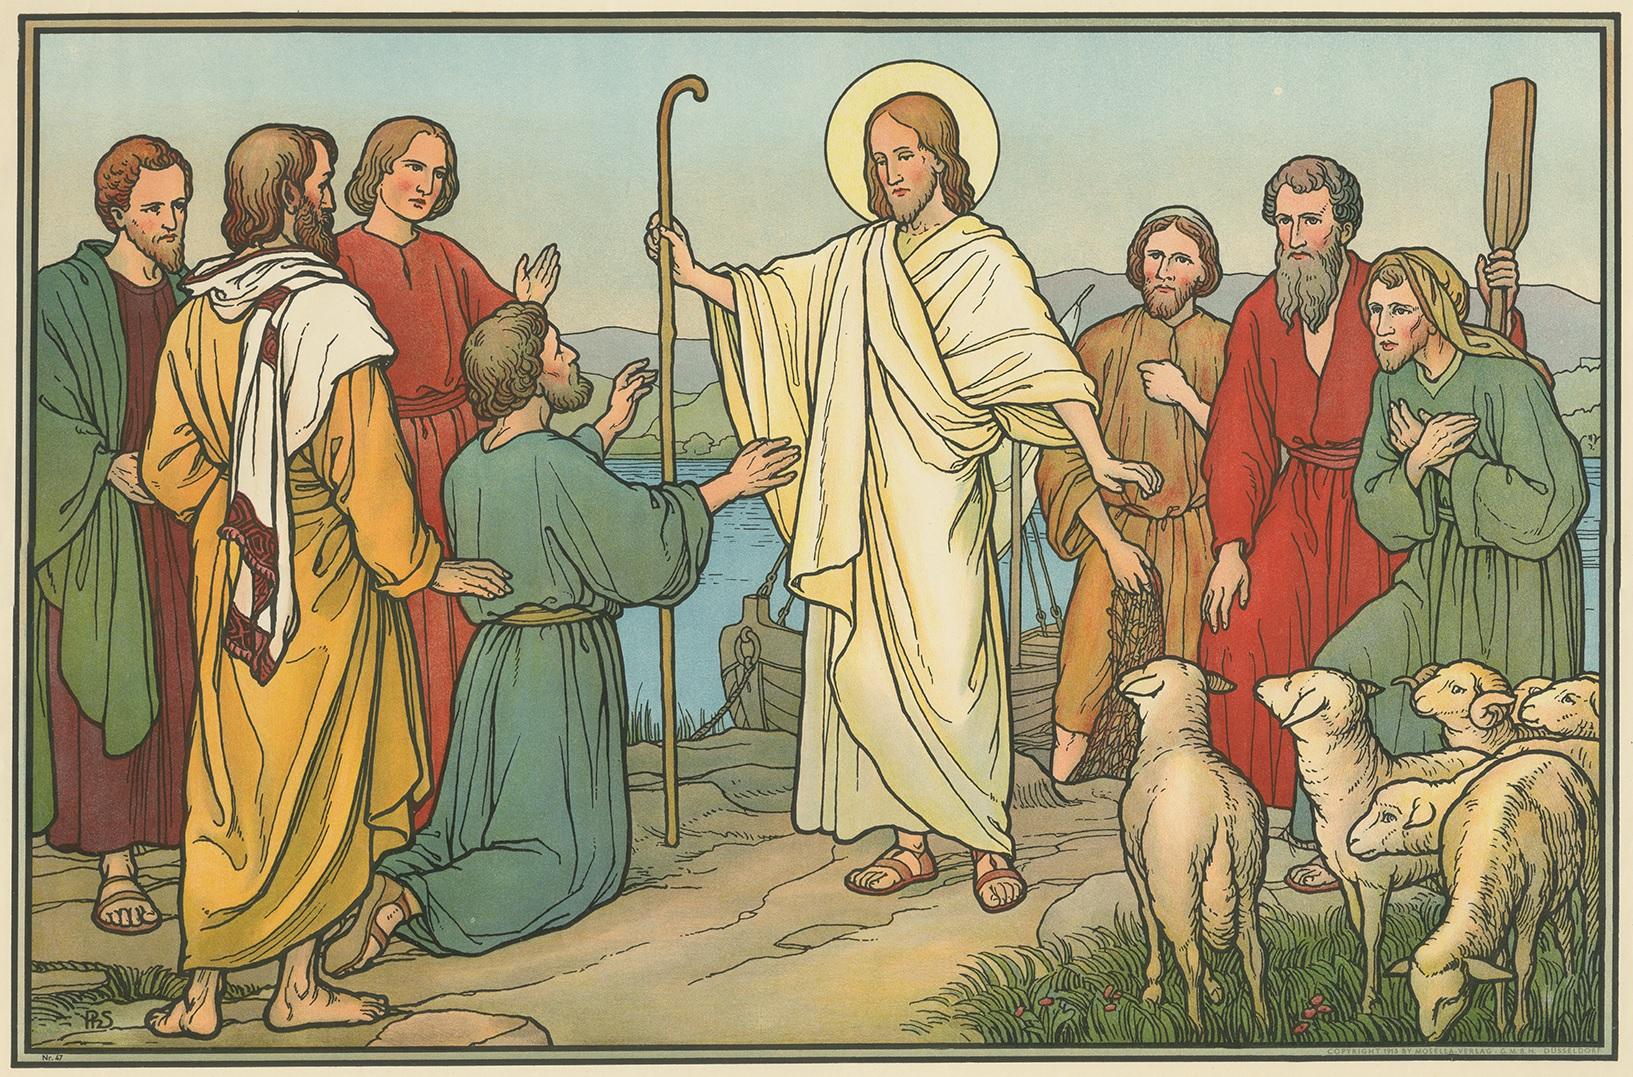 Large antique print of the appearance of Jesus. Published by Mosella-Verlag, 1913. This print originates from a series titled 'Kathol. Schulbibelwerk von Dr. Ecker'.